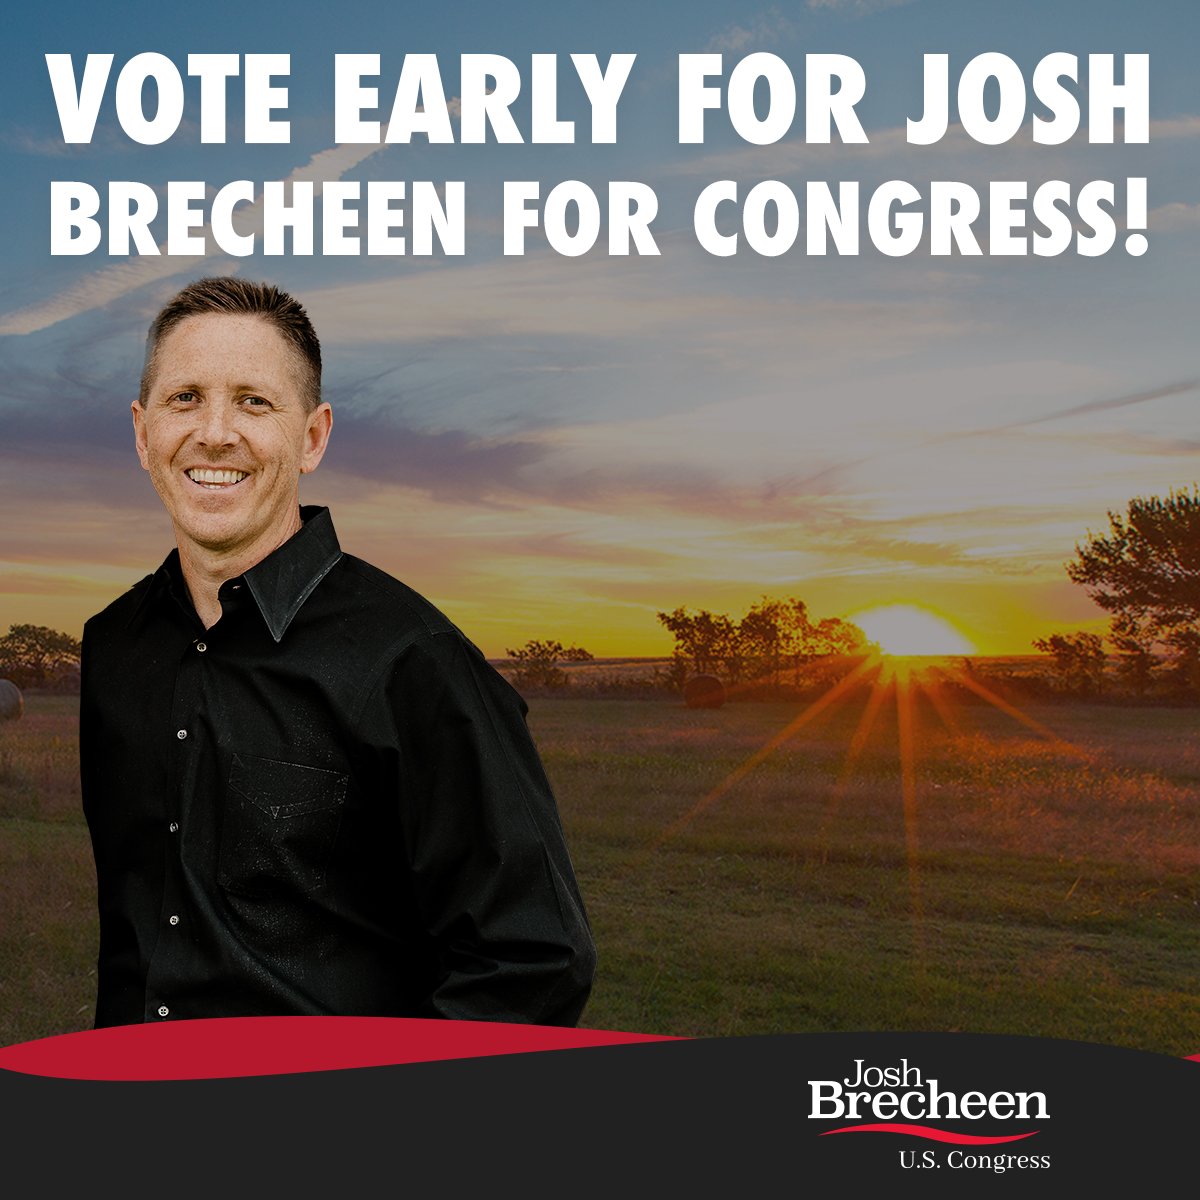 Be sure to vote early for Josh Brecheen for Congress! Like and retweet to show your support!